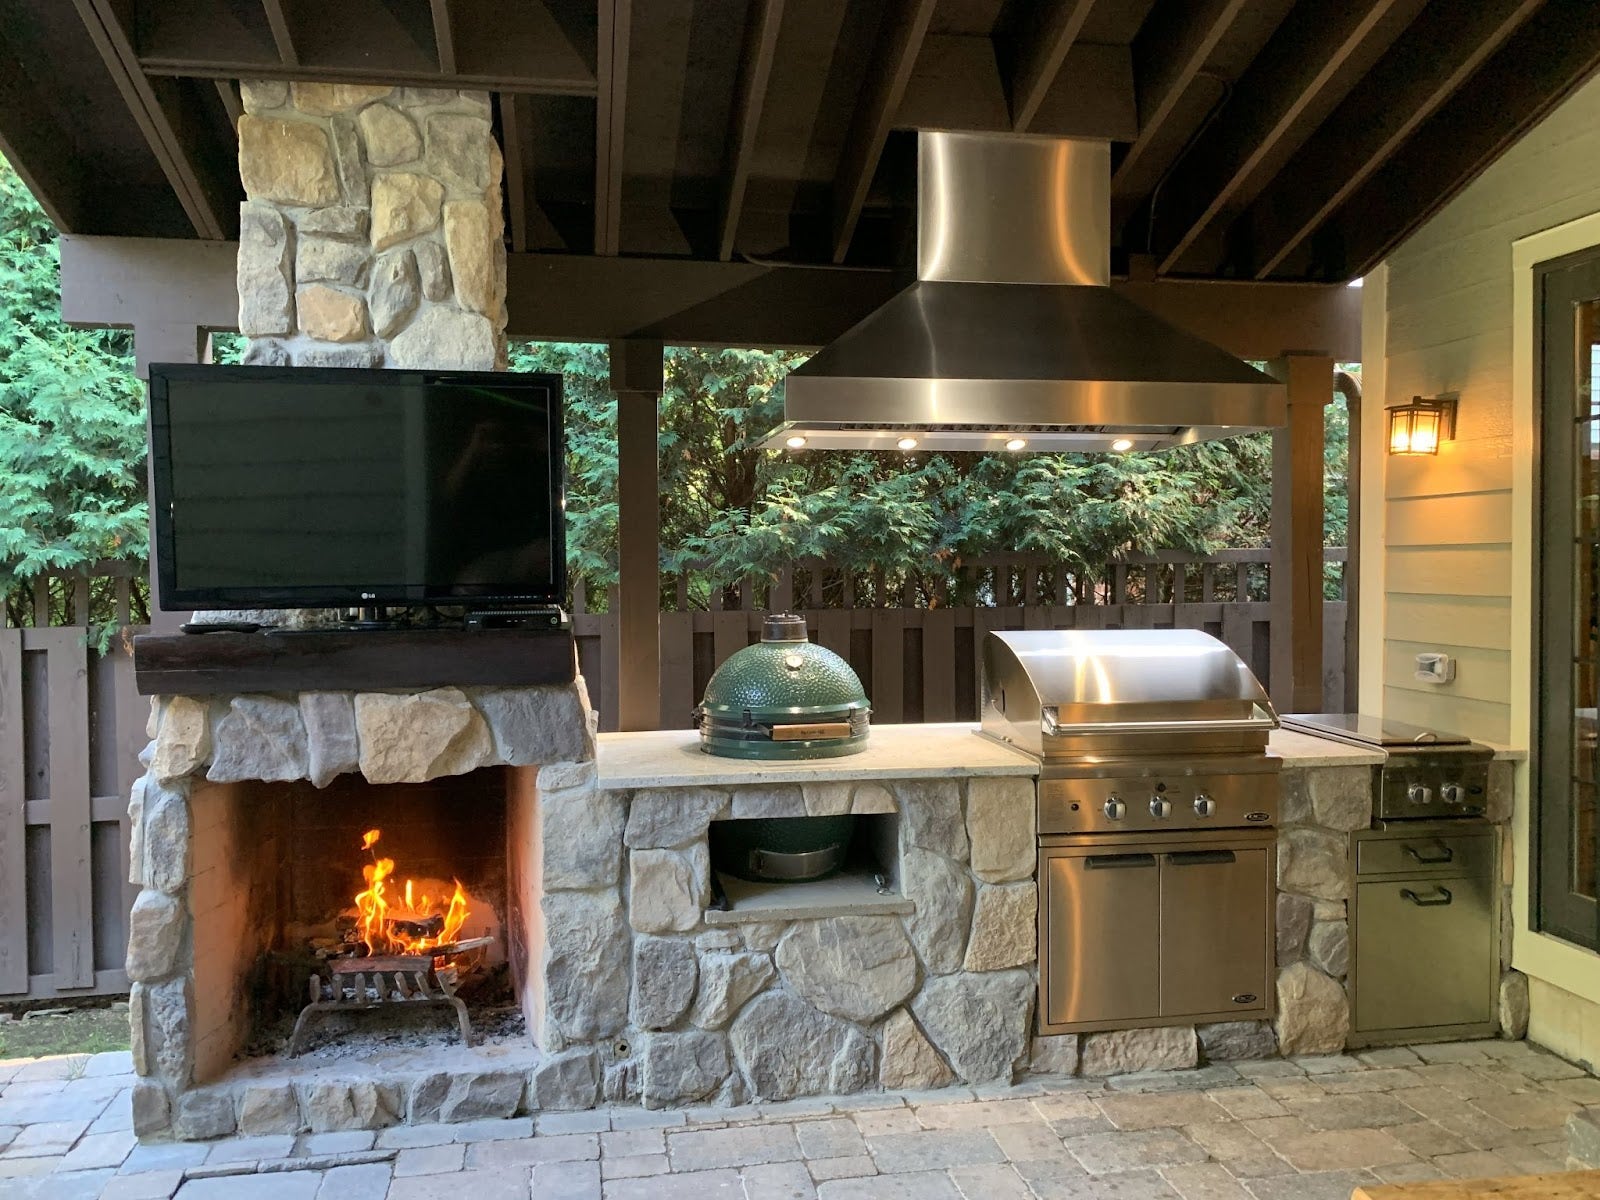 Cozy outdoor patio featuring a stone fireplace with a roaring fire, a modern grill, and a TV for entertainment.